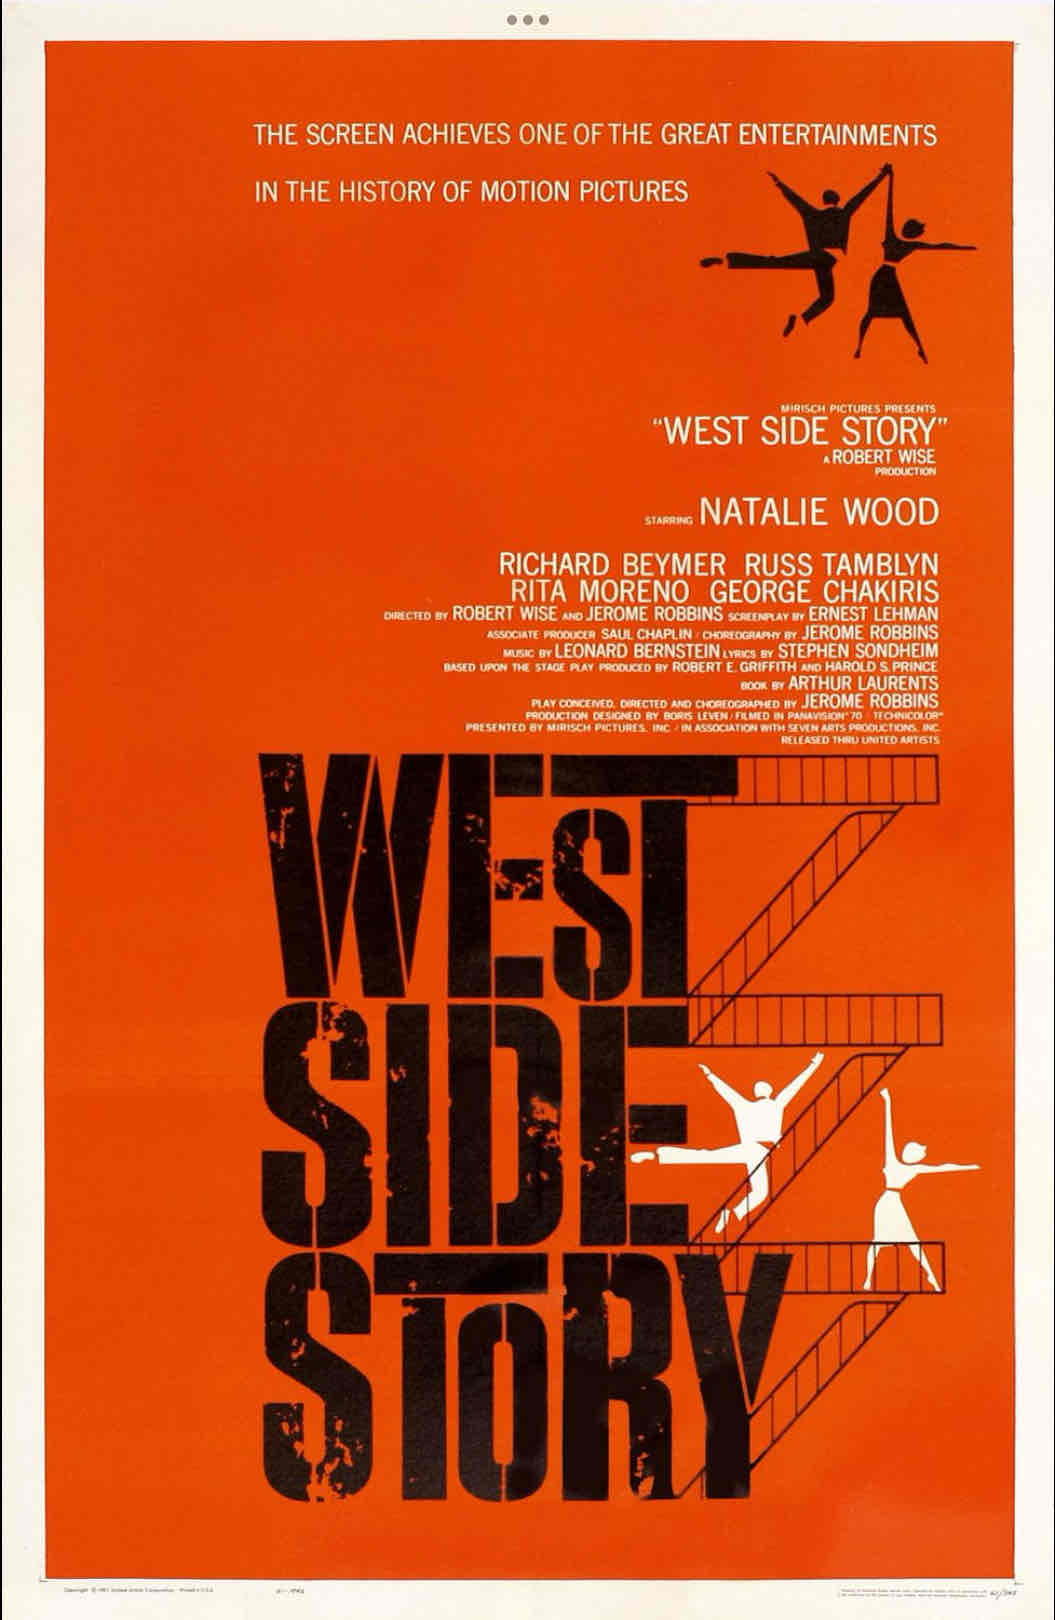 <p>why west side story poster is more successful</p>